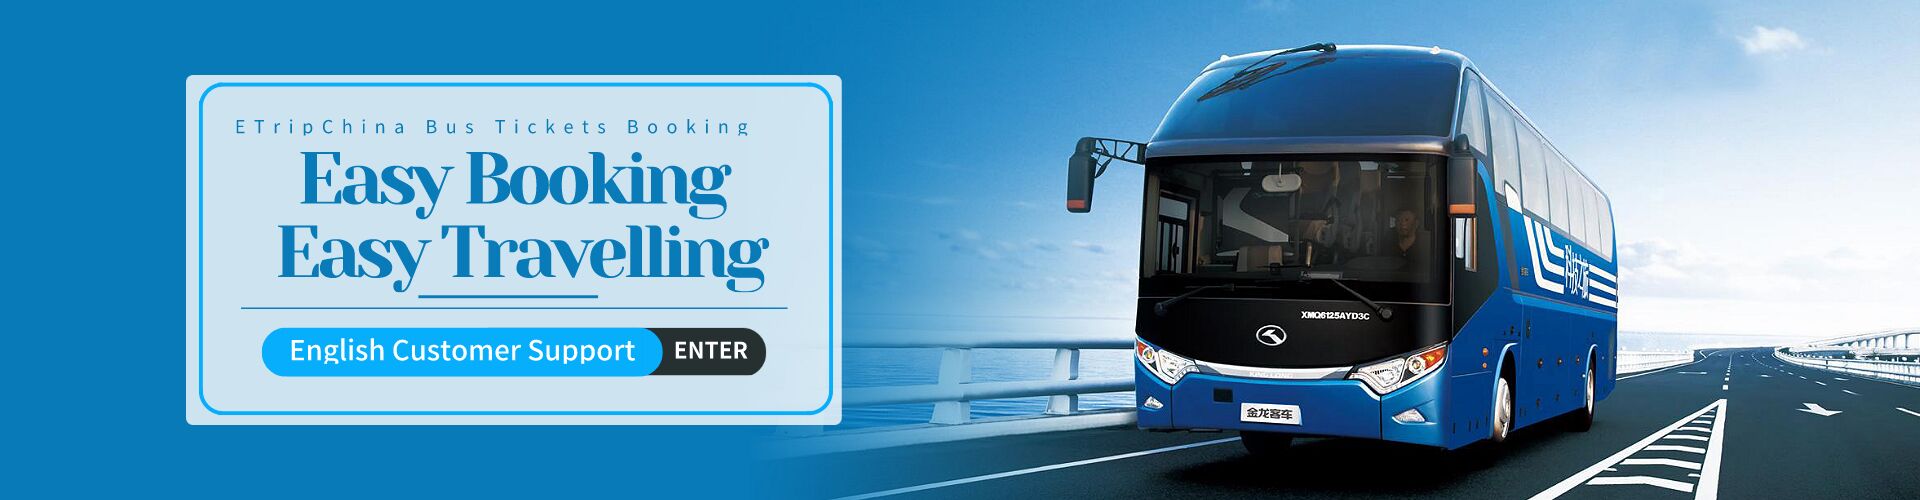 China bus tickets booking